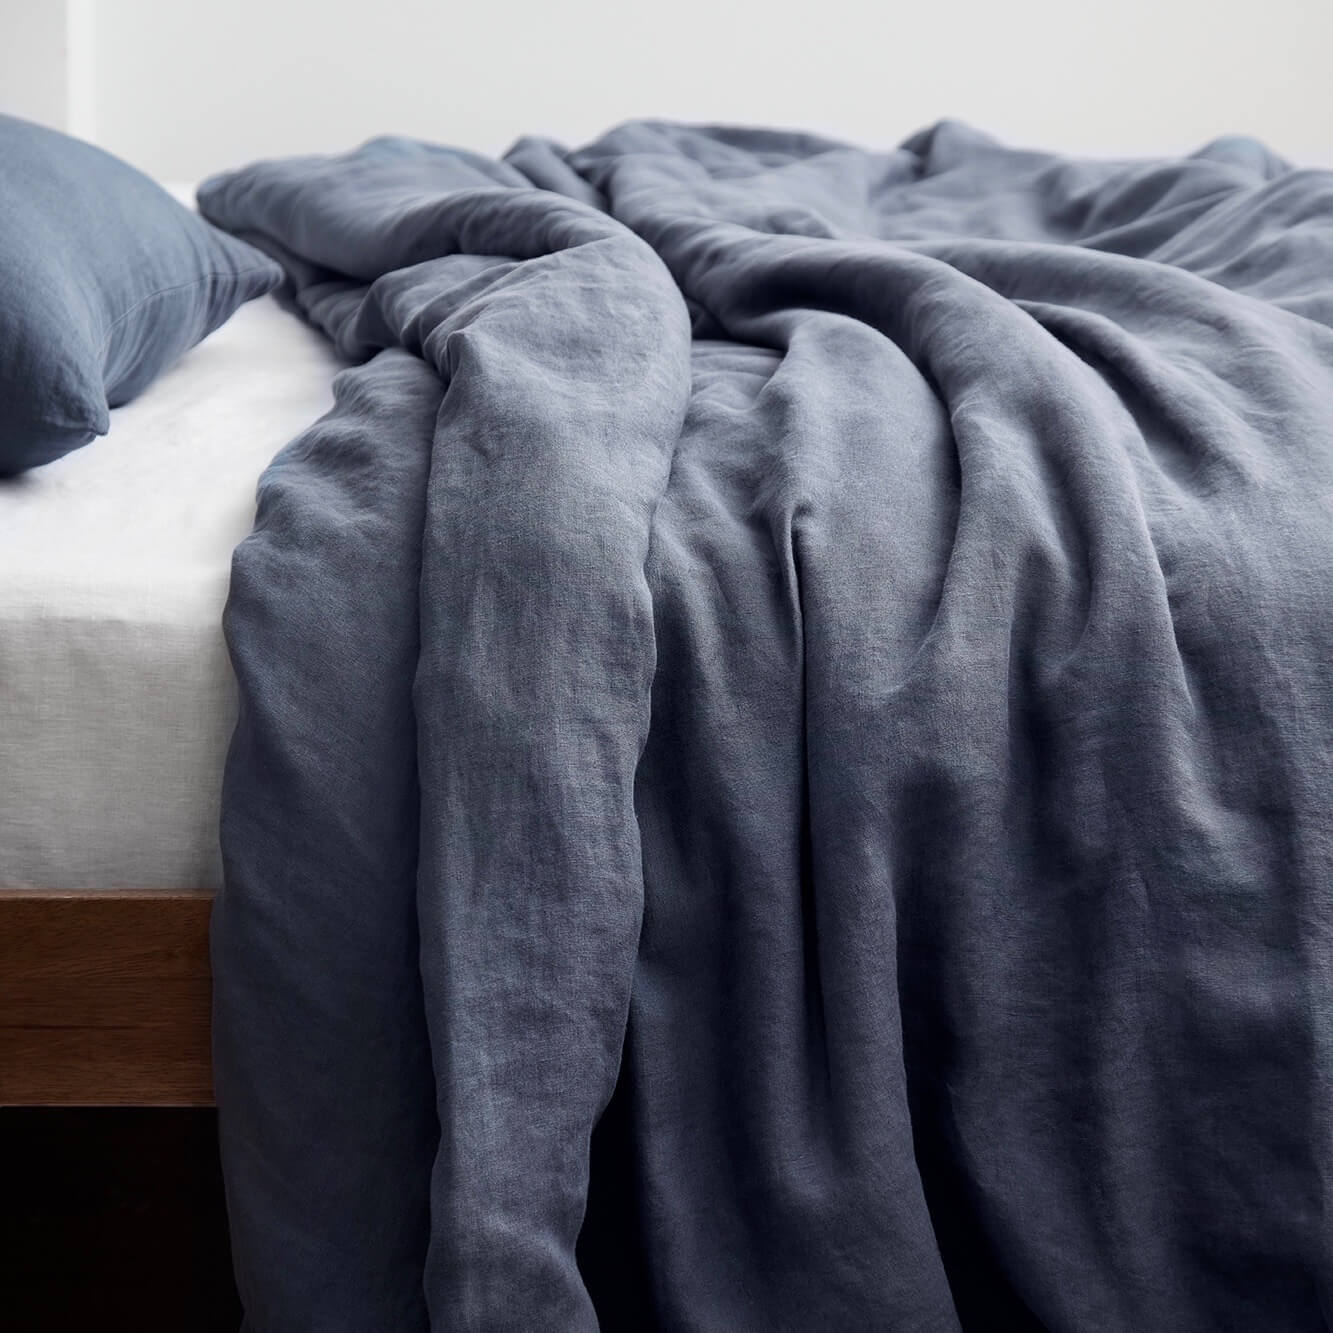 The Citizenry Stonewashed Linen Duvet Cover | Full/Queen | Duvet Only | Sand - Image 9